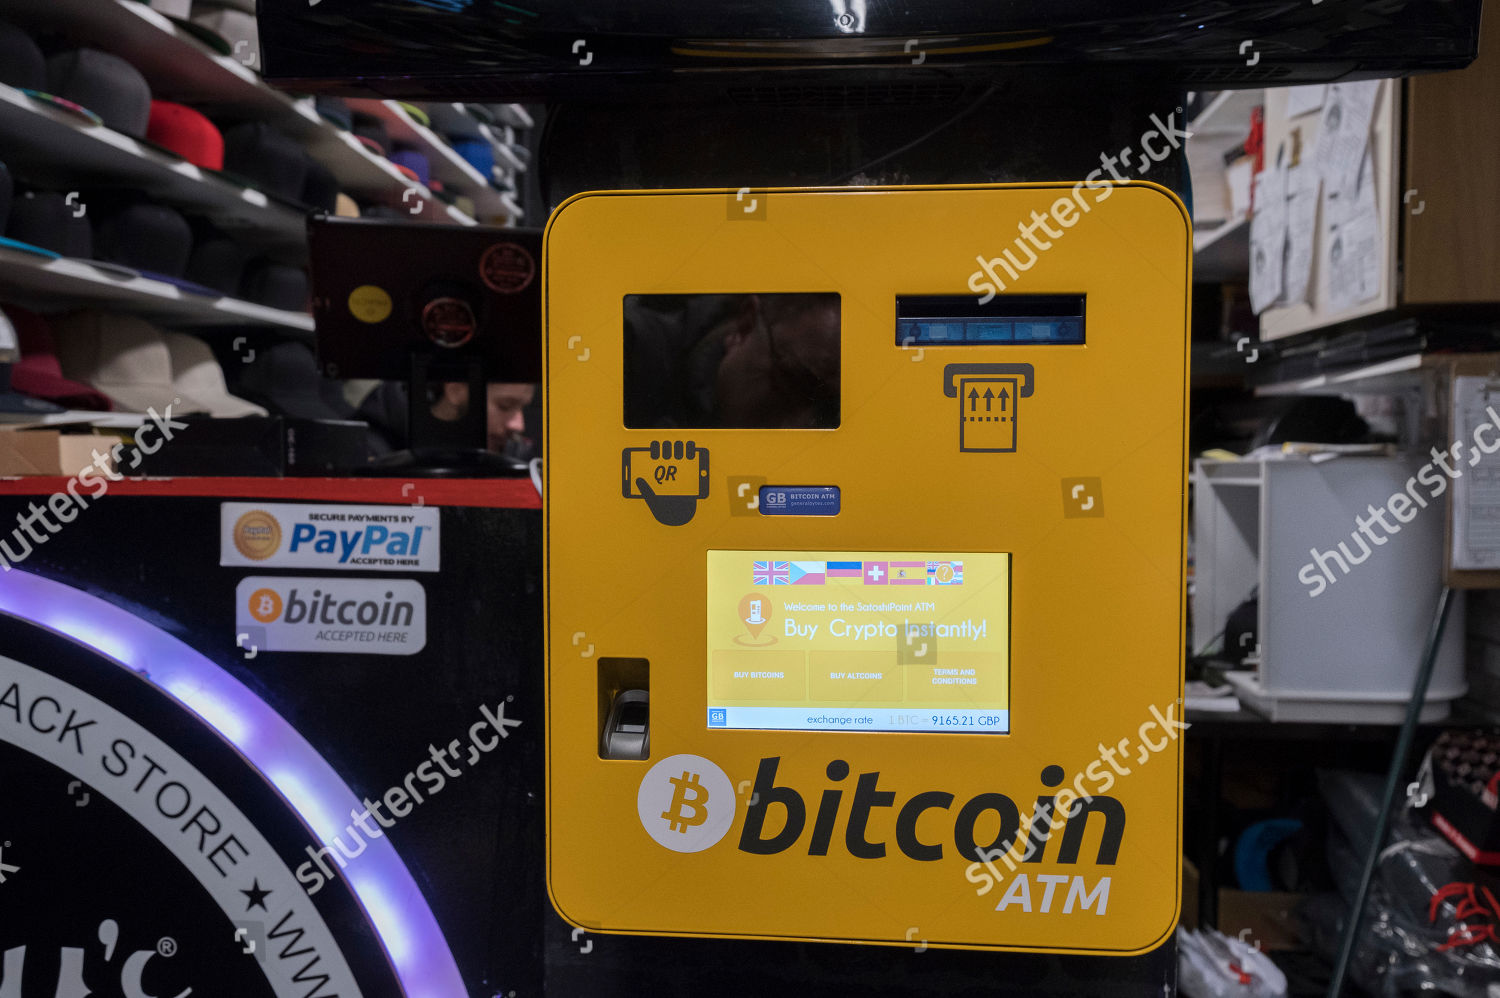 Bitcoin Vending Machines London Here Mr Snappy Editorial Stock Photo - 